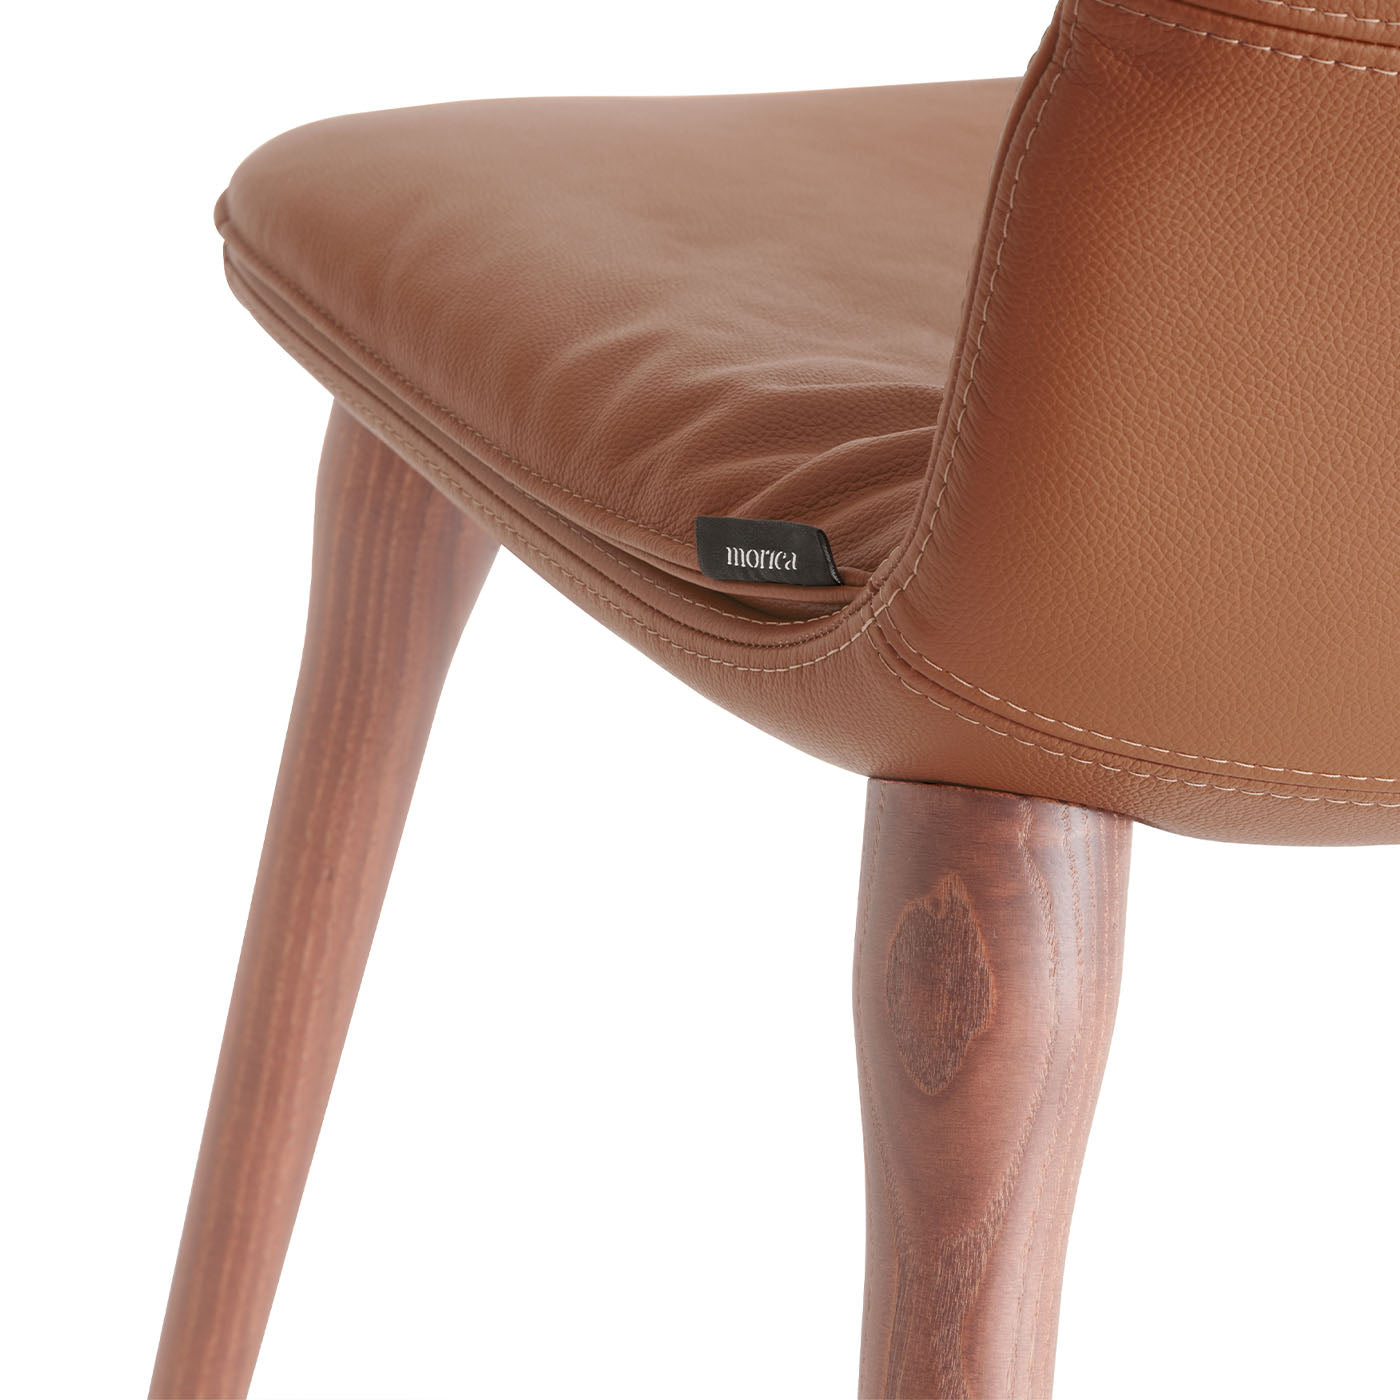 Coco Cognac-Toned Leather Chair - Alternative view 4